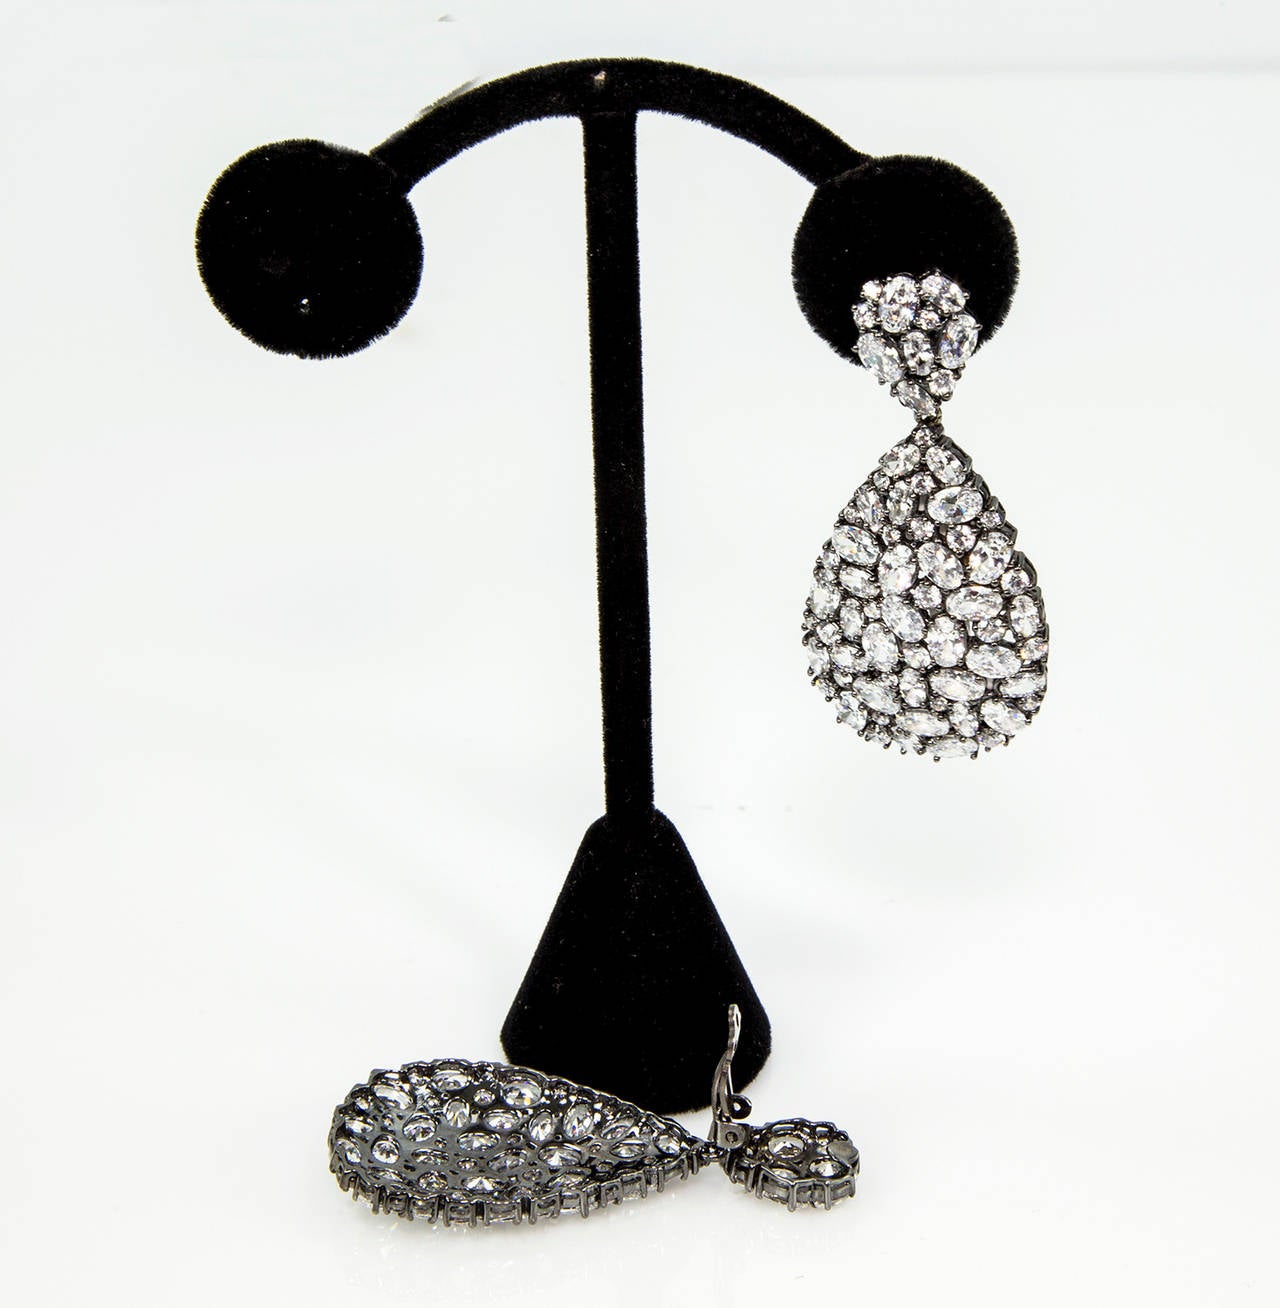 Beautiful double Teardrop design Dangle Earrings, crafted in Black Rhodium plated sterling silver and encrusted with sparkling Faux Diamond CZ; Teardrop pendant measures 1.5″ long, top Teardrop measures 0.5″ long;  Earrings measures 2.25″ total